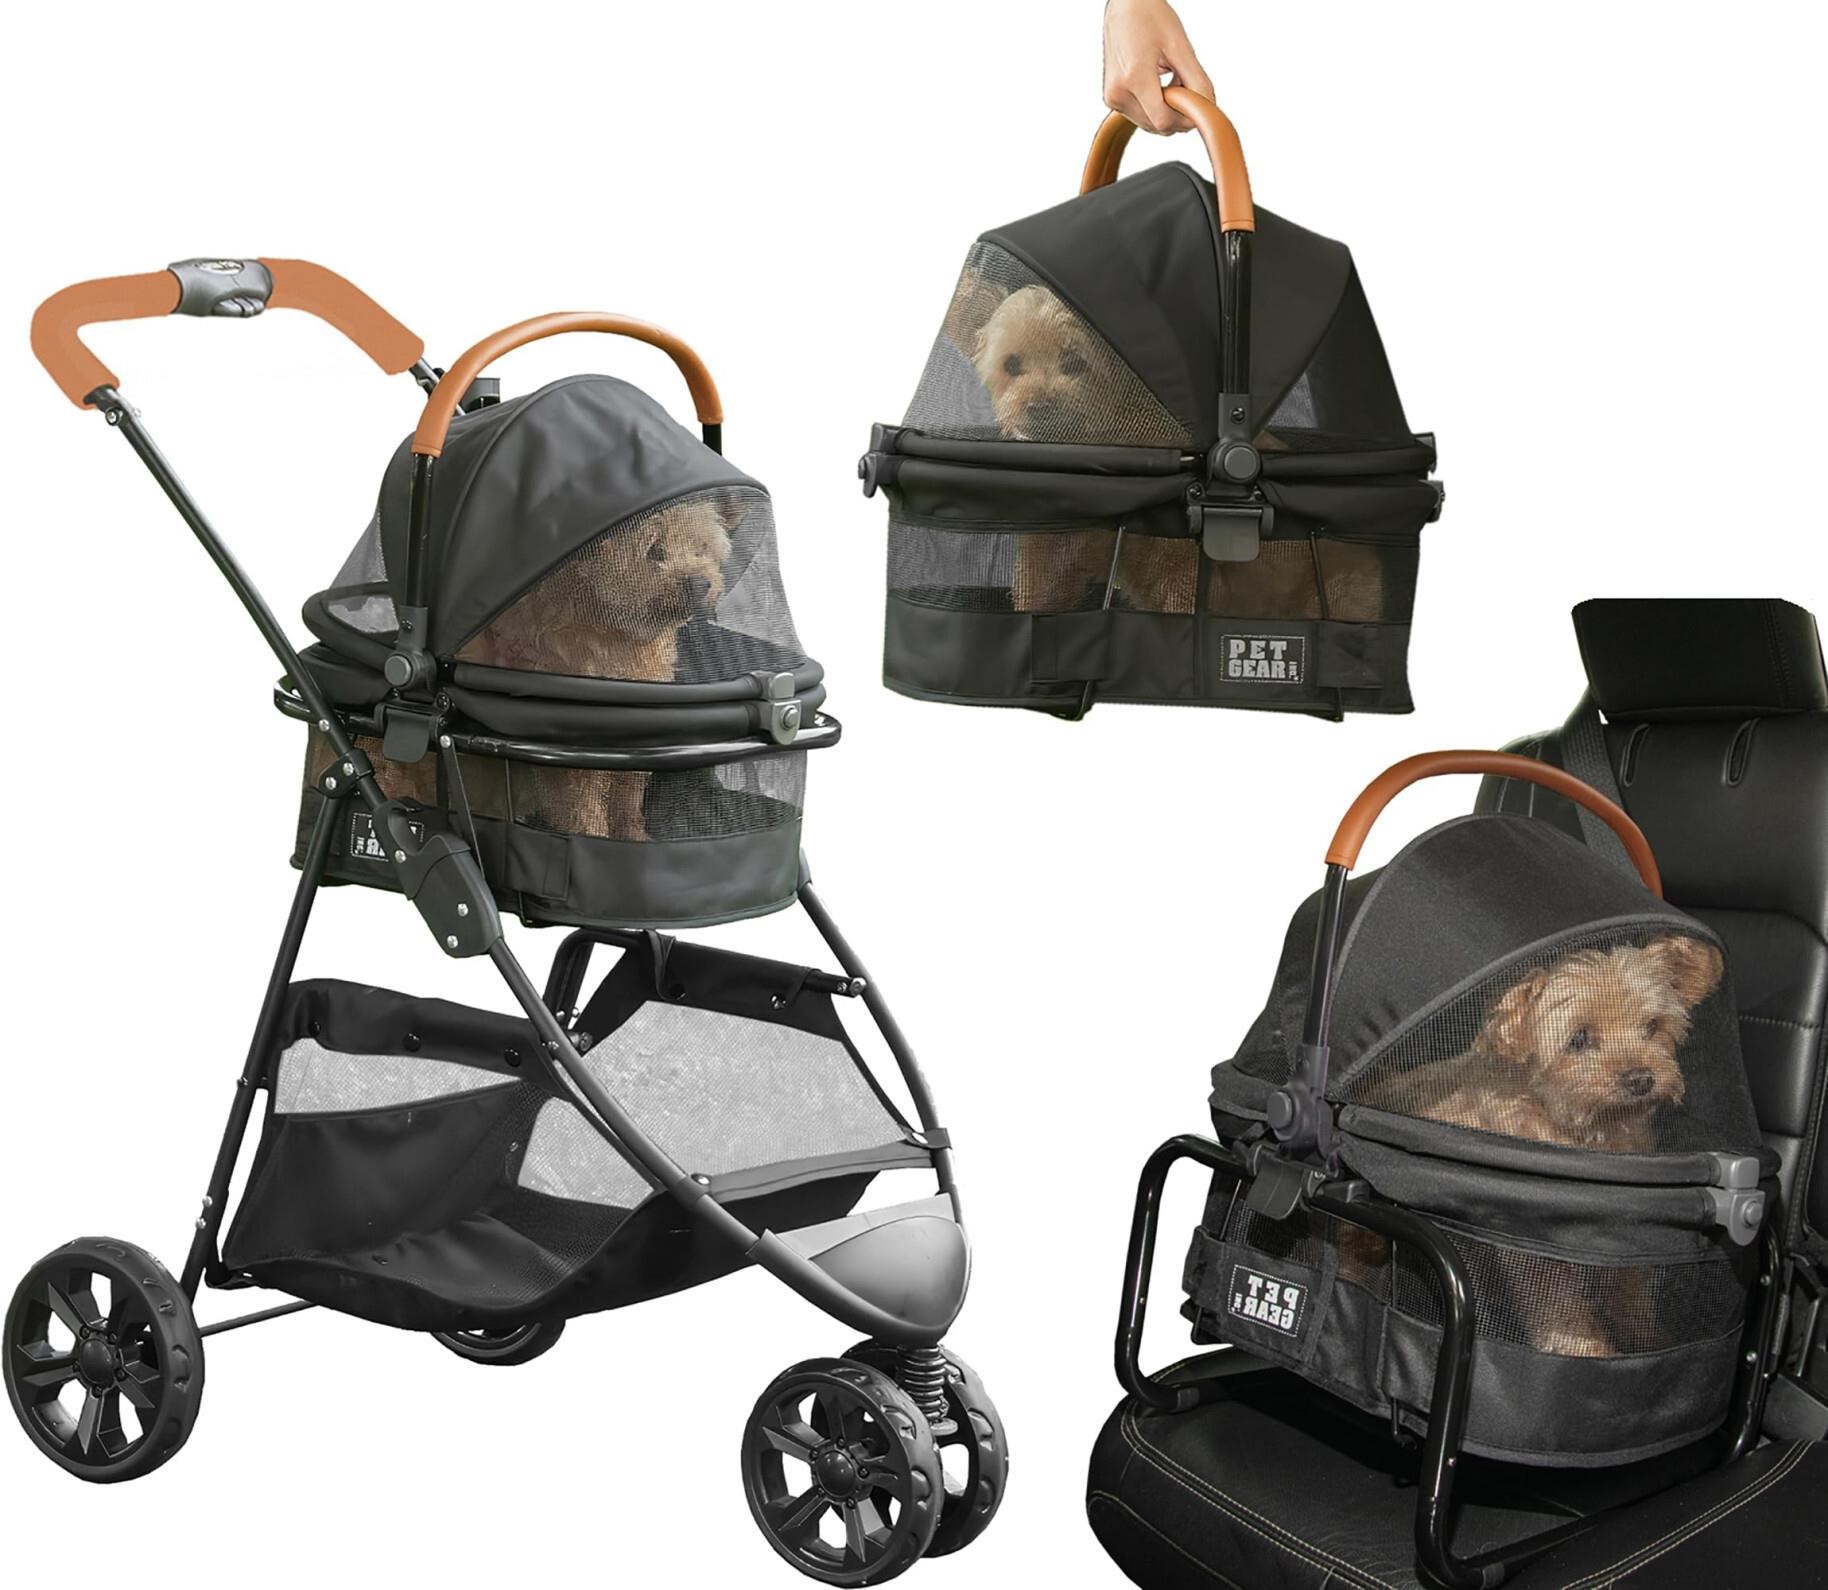 Pet Gear 3-in-1 Travel System, View 360 Ultra Ligh